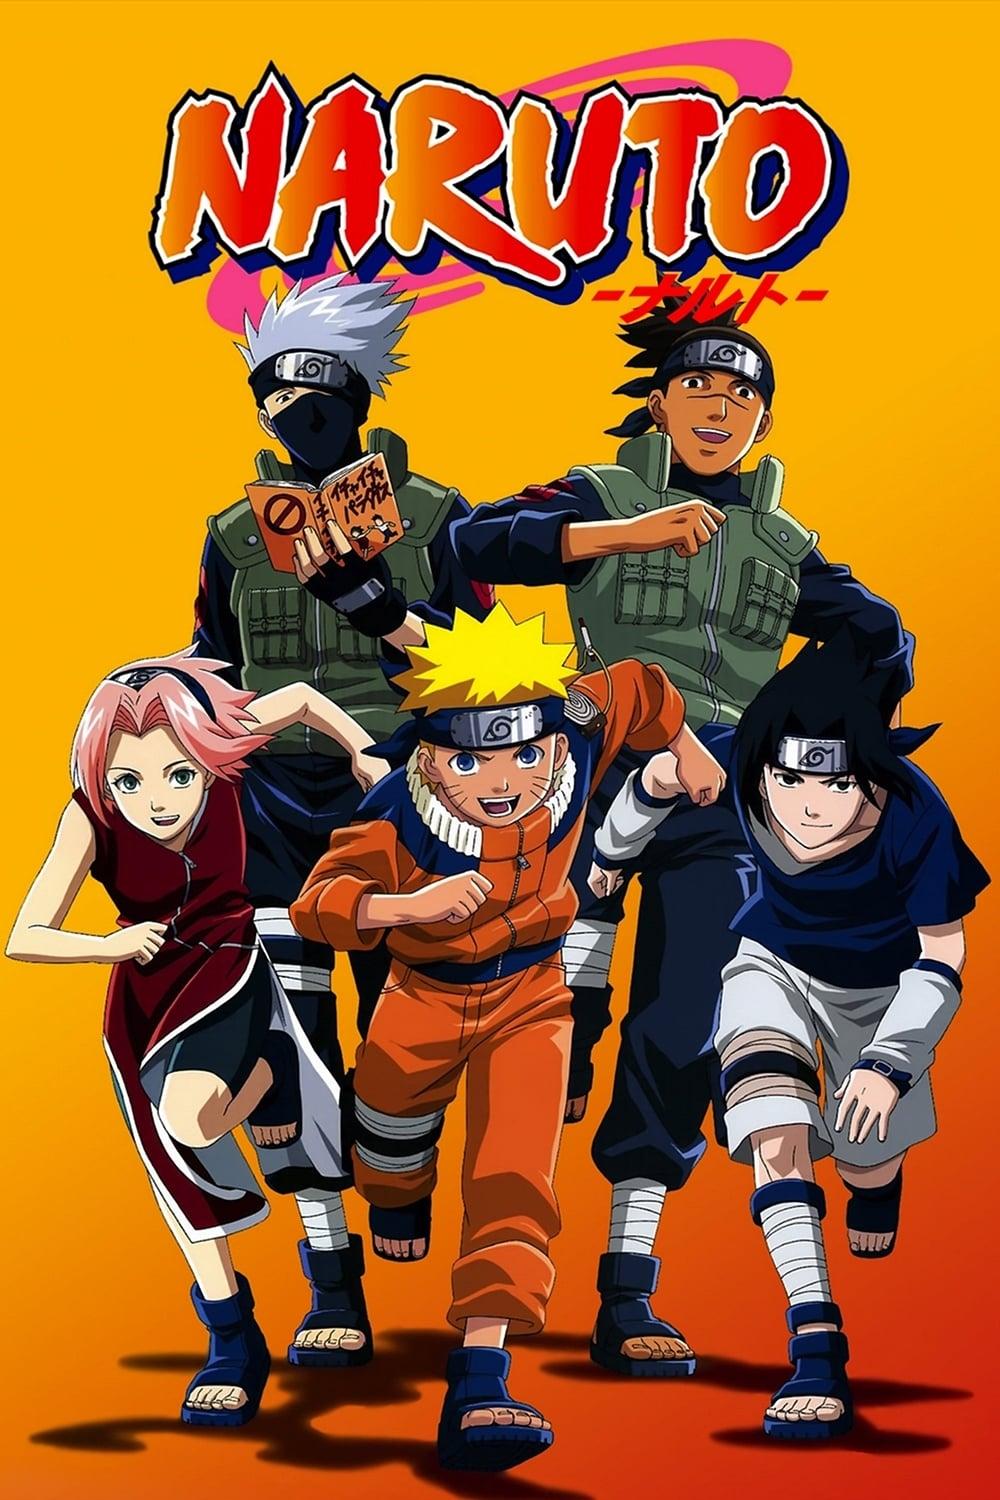 1000 x 1500 · jpeg - Naruto TV Show Poster - ID: 361913 - Image Abyss